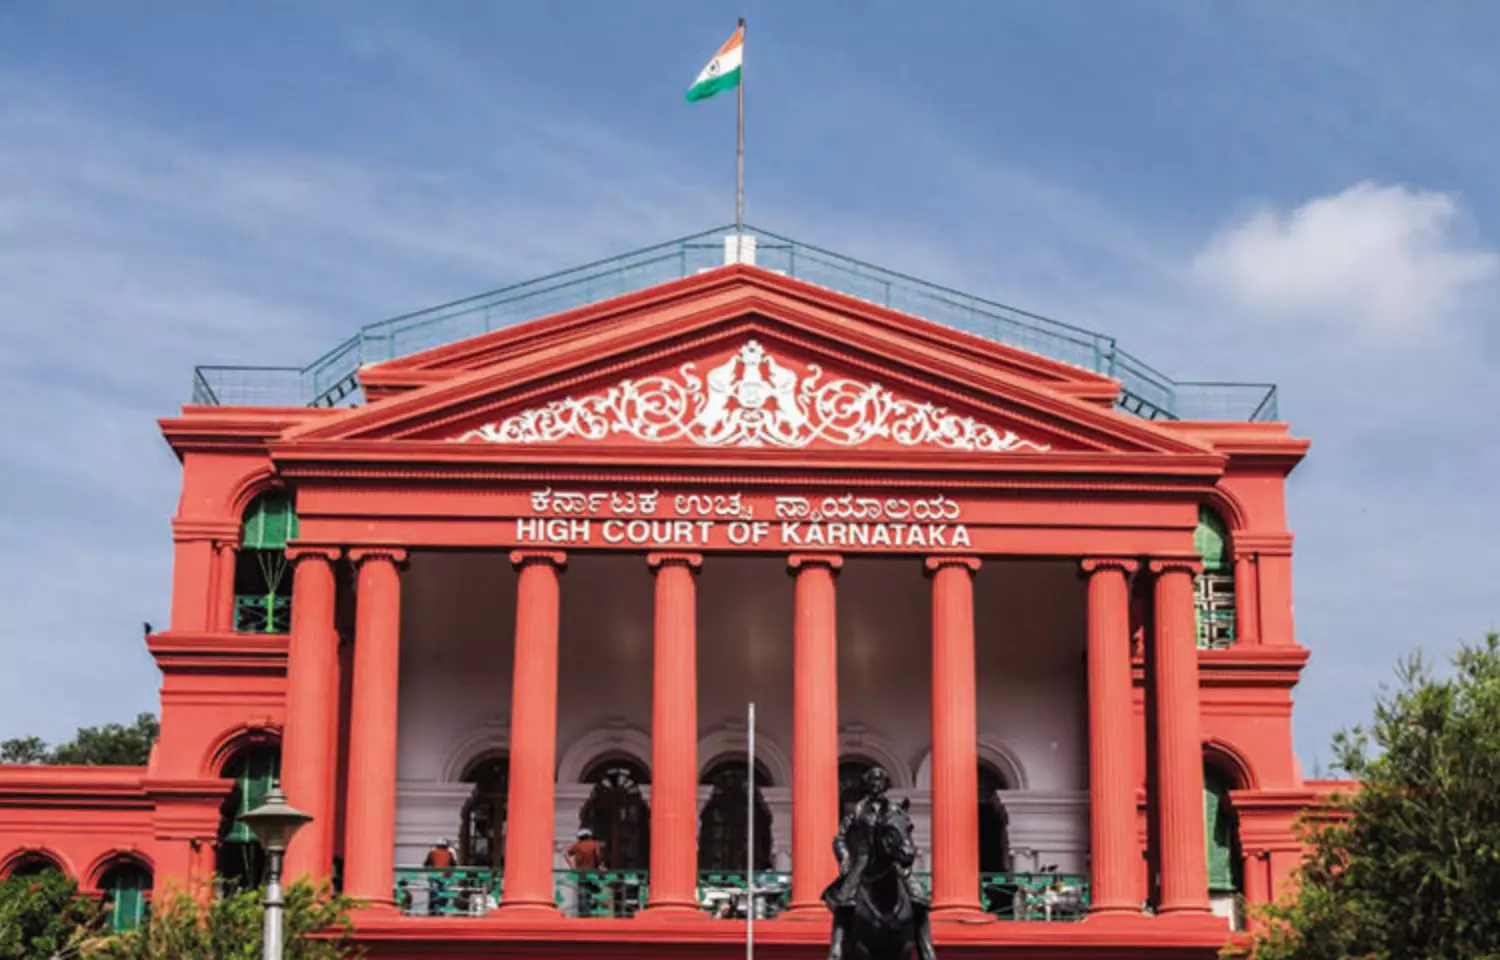 Provide Affiliation to Medical Colleges with Clockwork precision: Karnataka HC to authorities